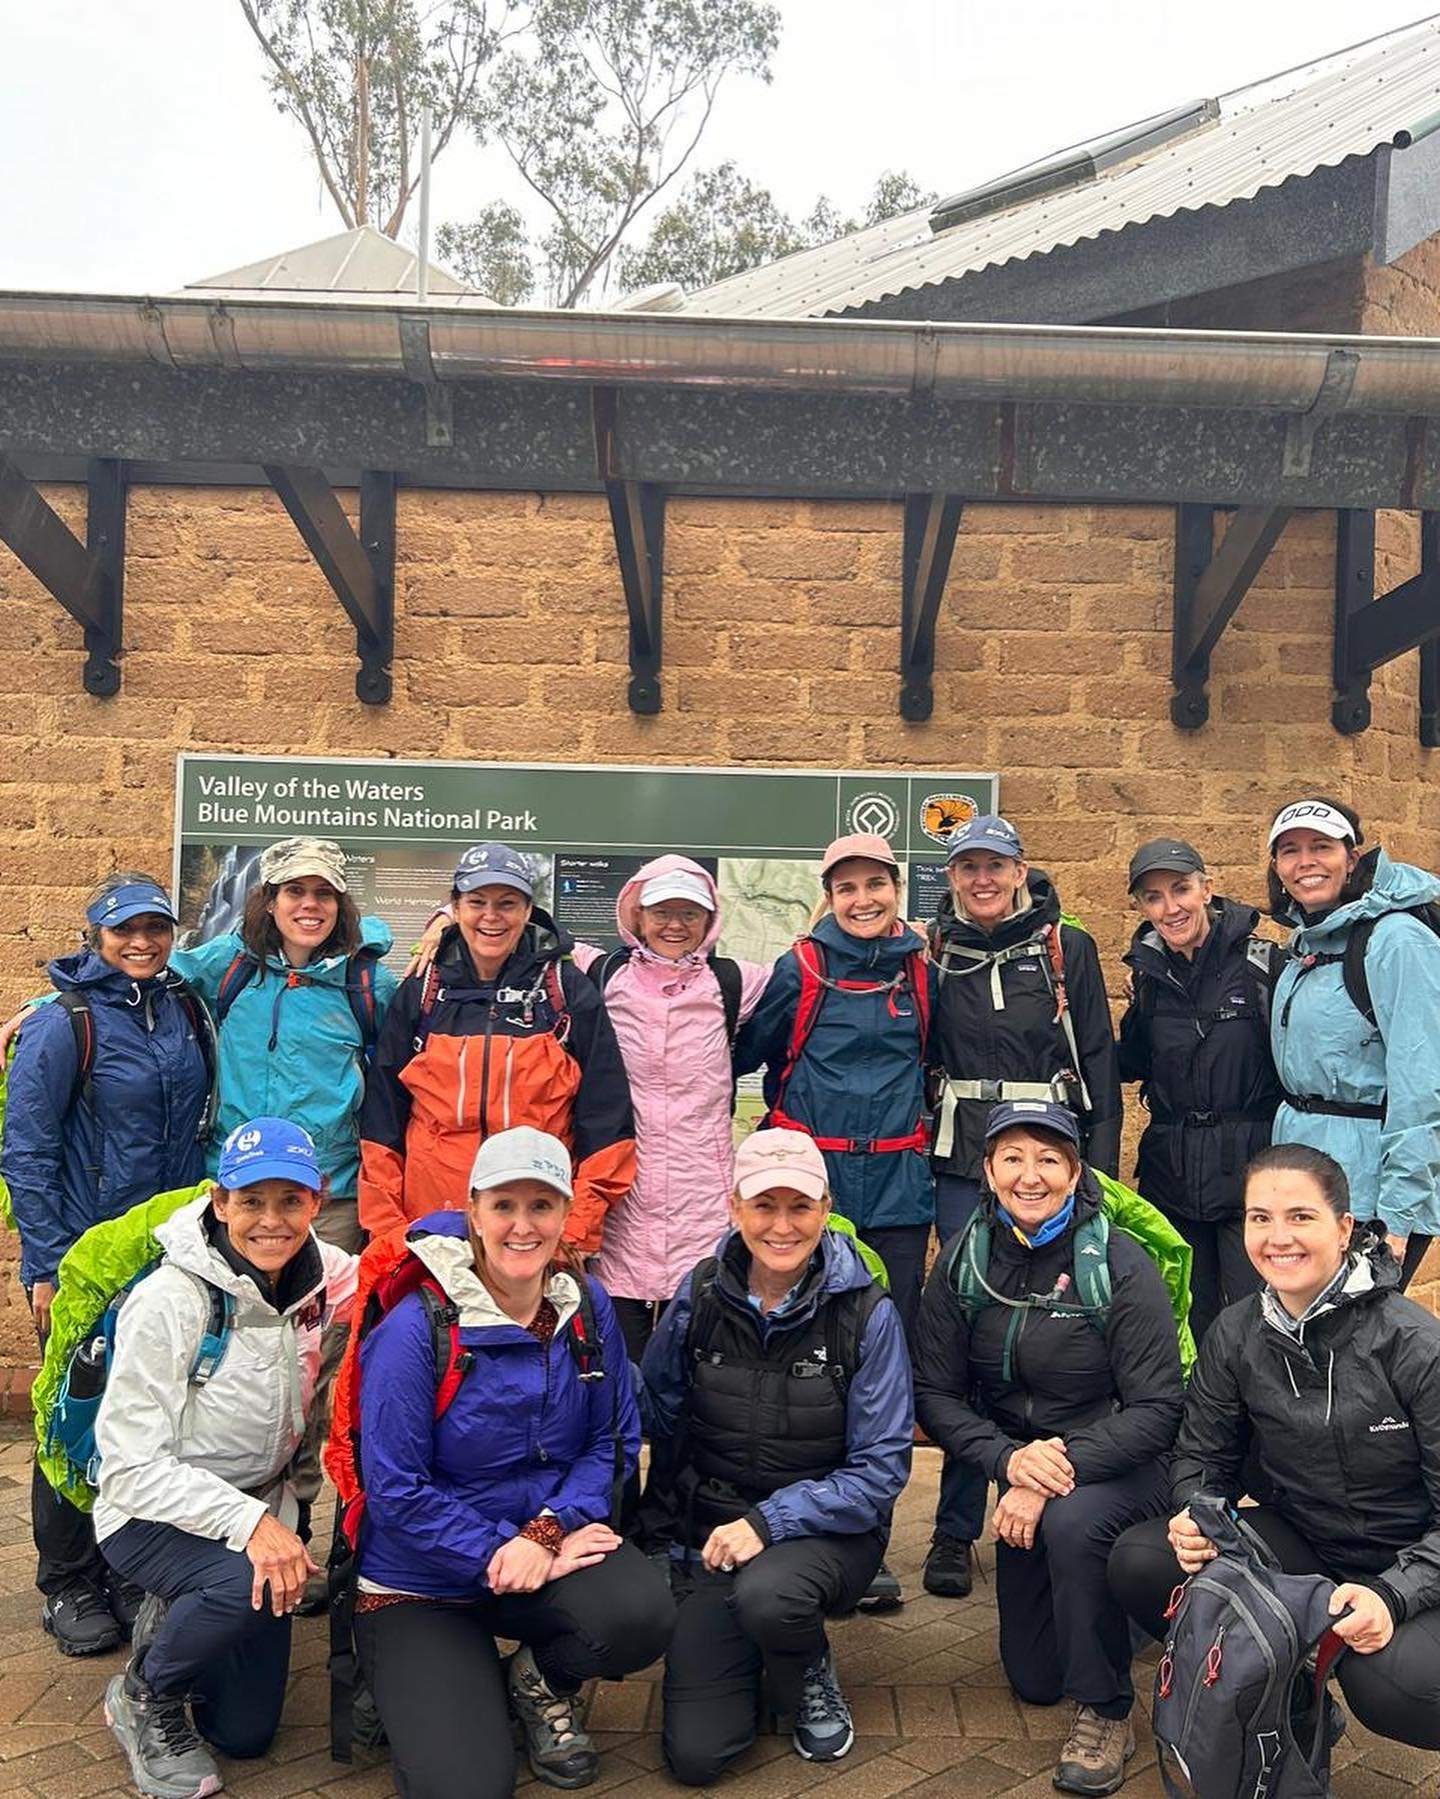 Day one of our Blue Mountains trek, misty, atmospheric and always beautiful.